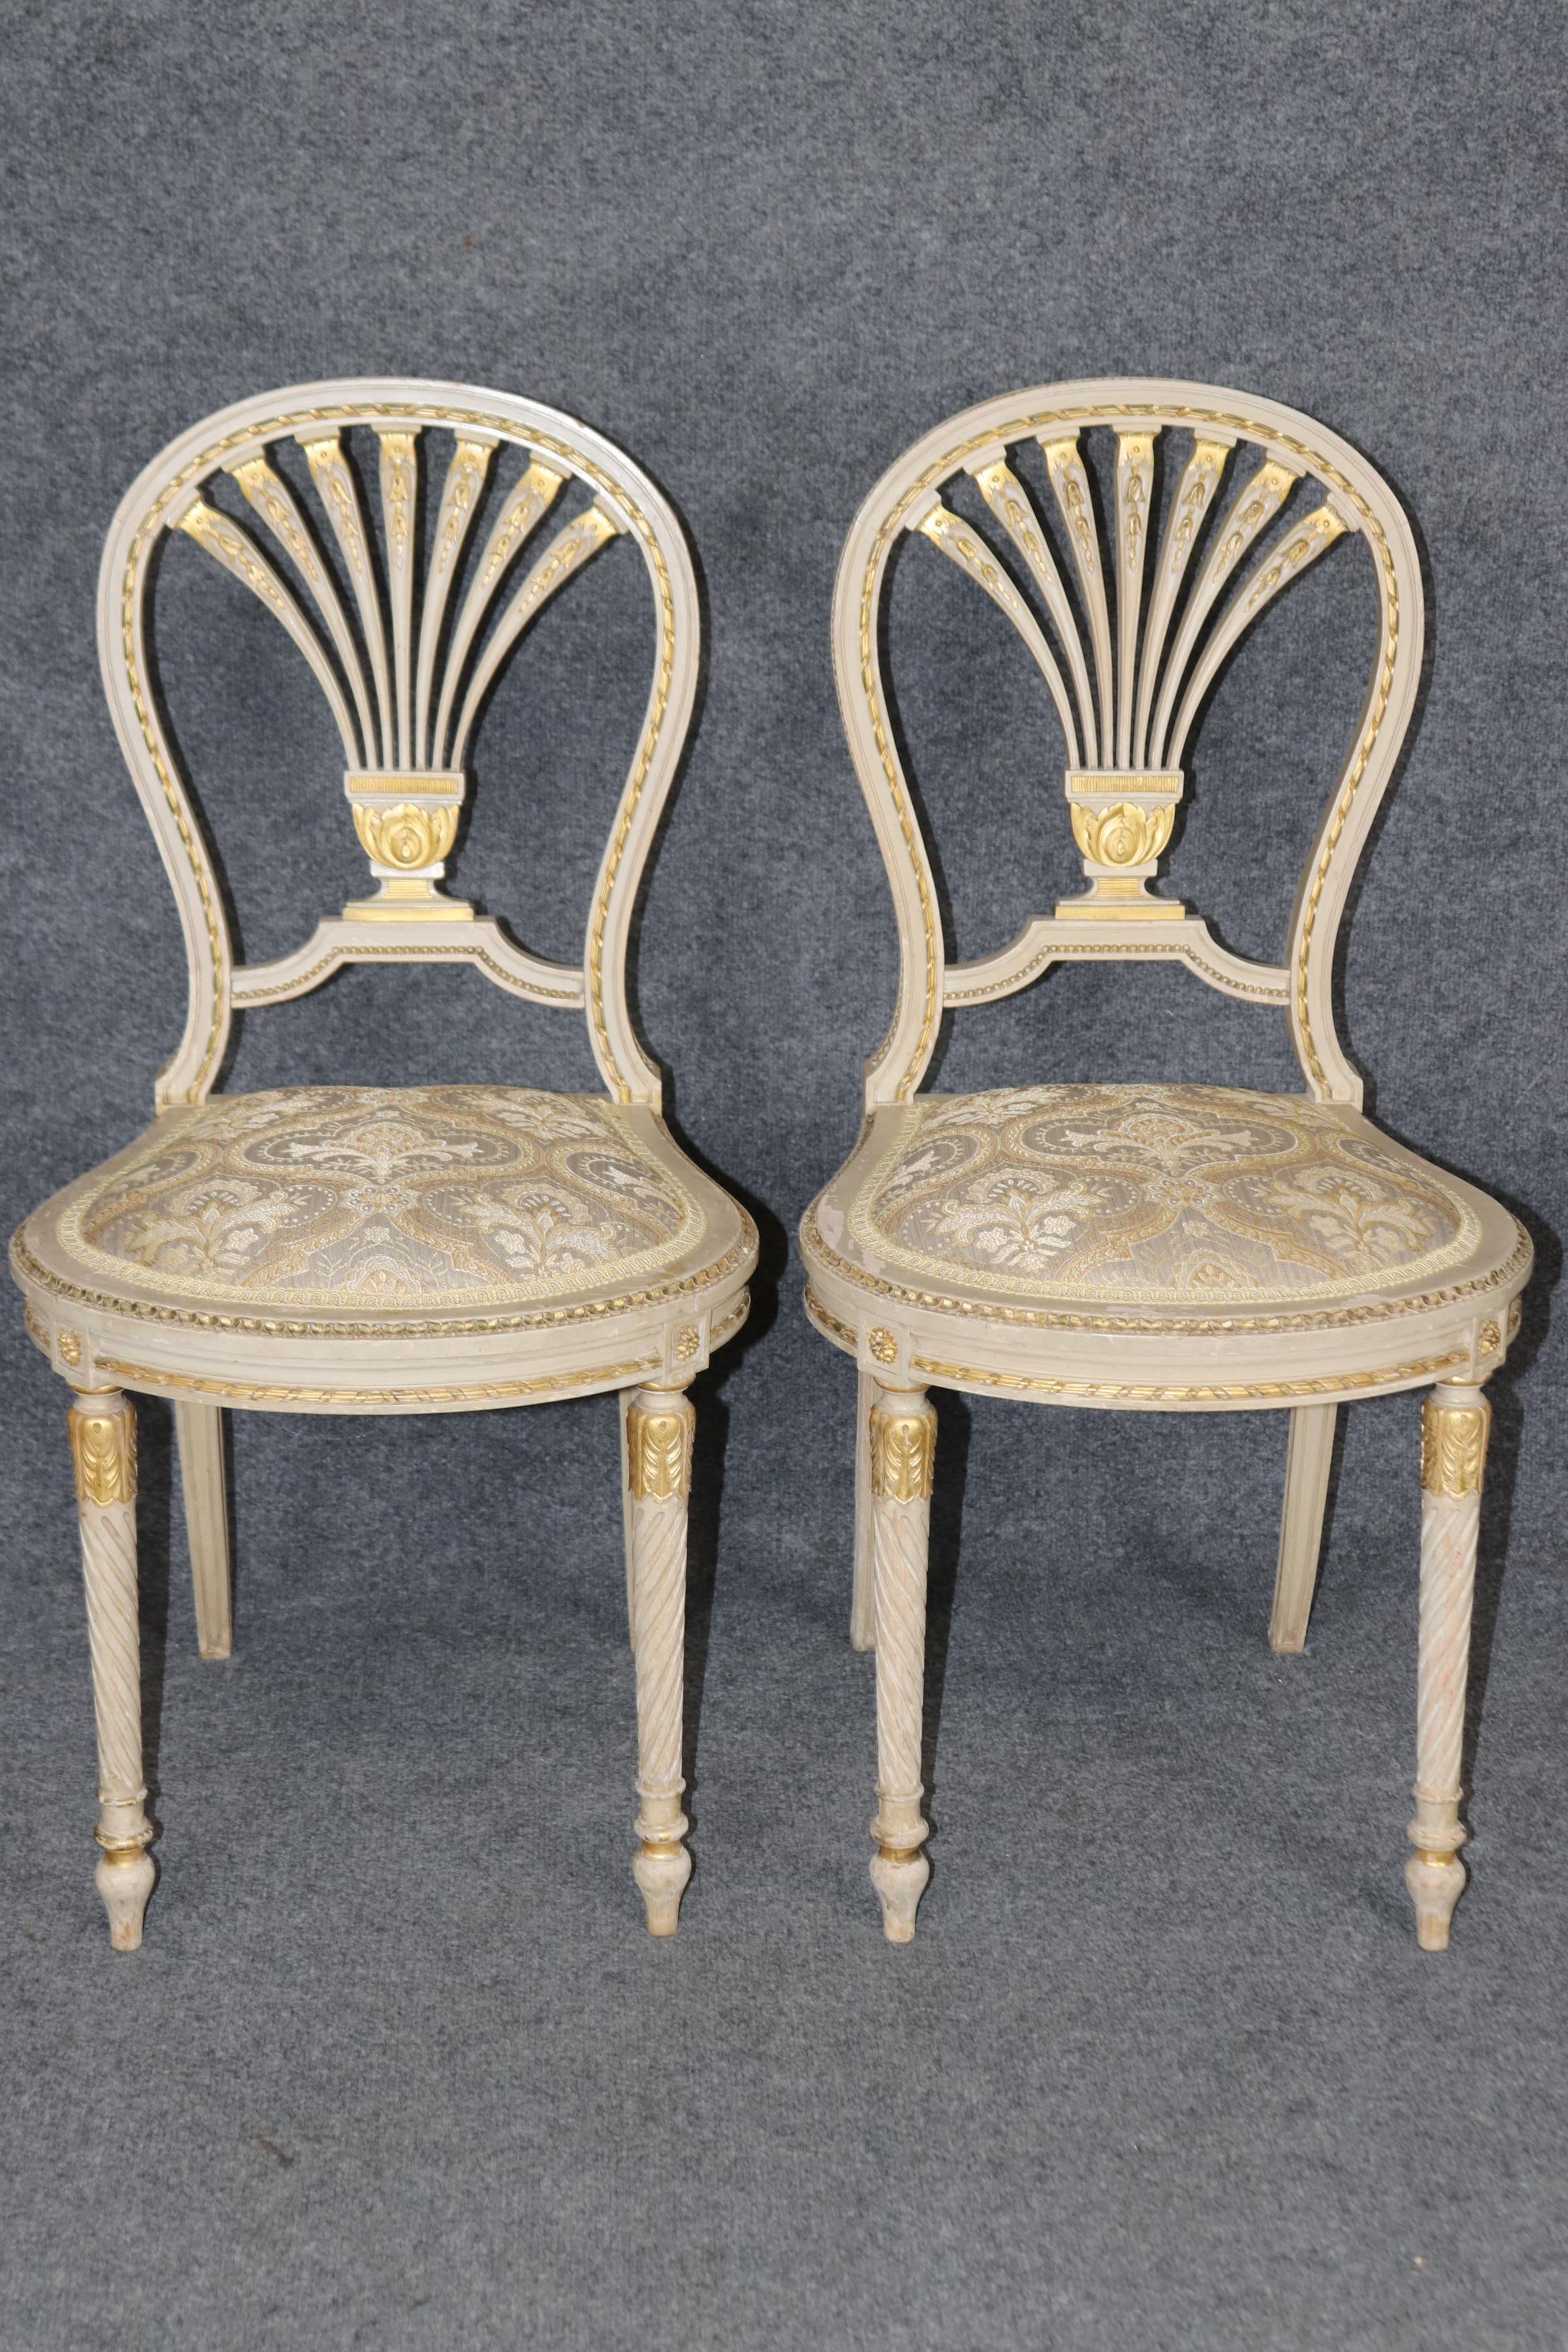 Dimensions- H: 34 1/2in W: 17 1/2in D: 17in SH: 17 1/2in

This Pair of Louis XVI Style French Paint Decorated Balloon Back Side Chairs attributed to Maison Jansen are made of the highest quality! If you look at the photos provided you will see the